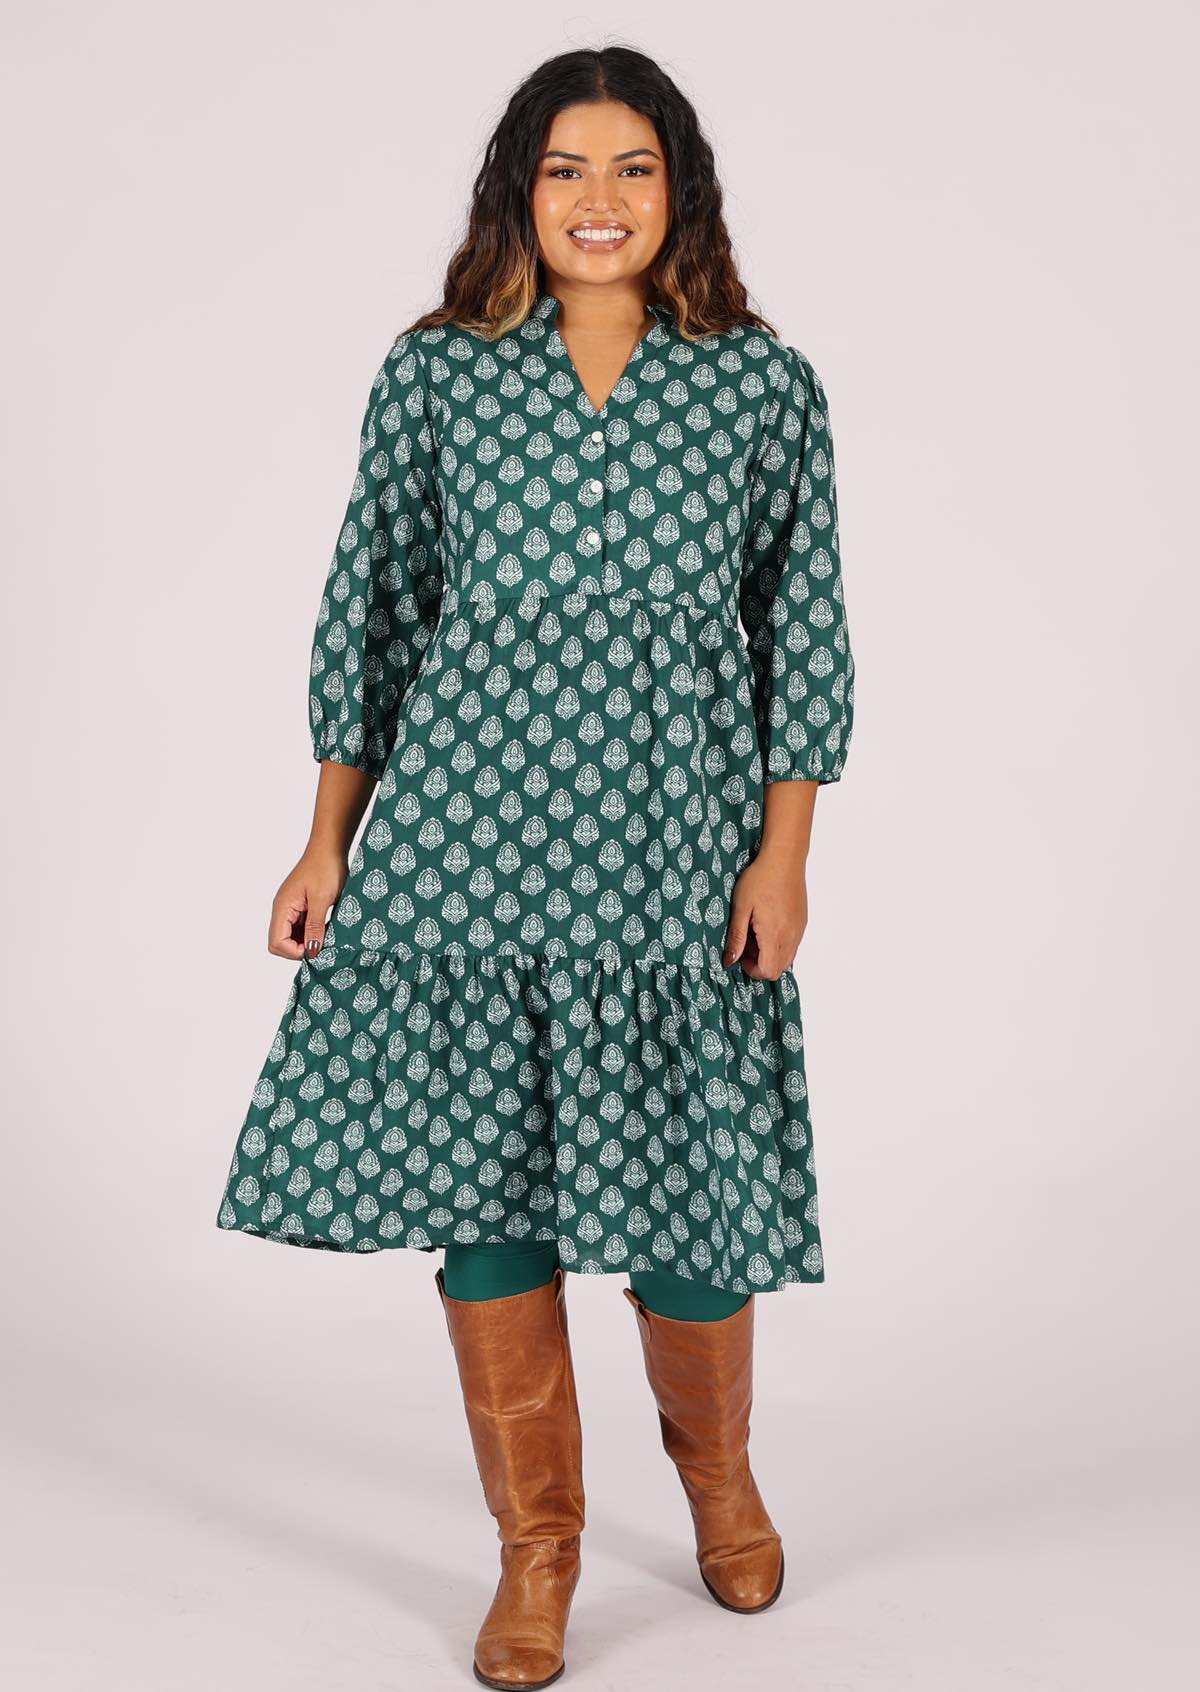 Cotton relaxed fit dress with buttoned bodice and mandarin collar